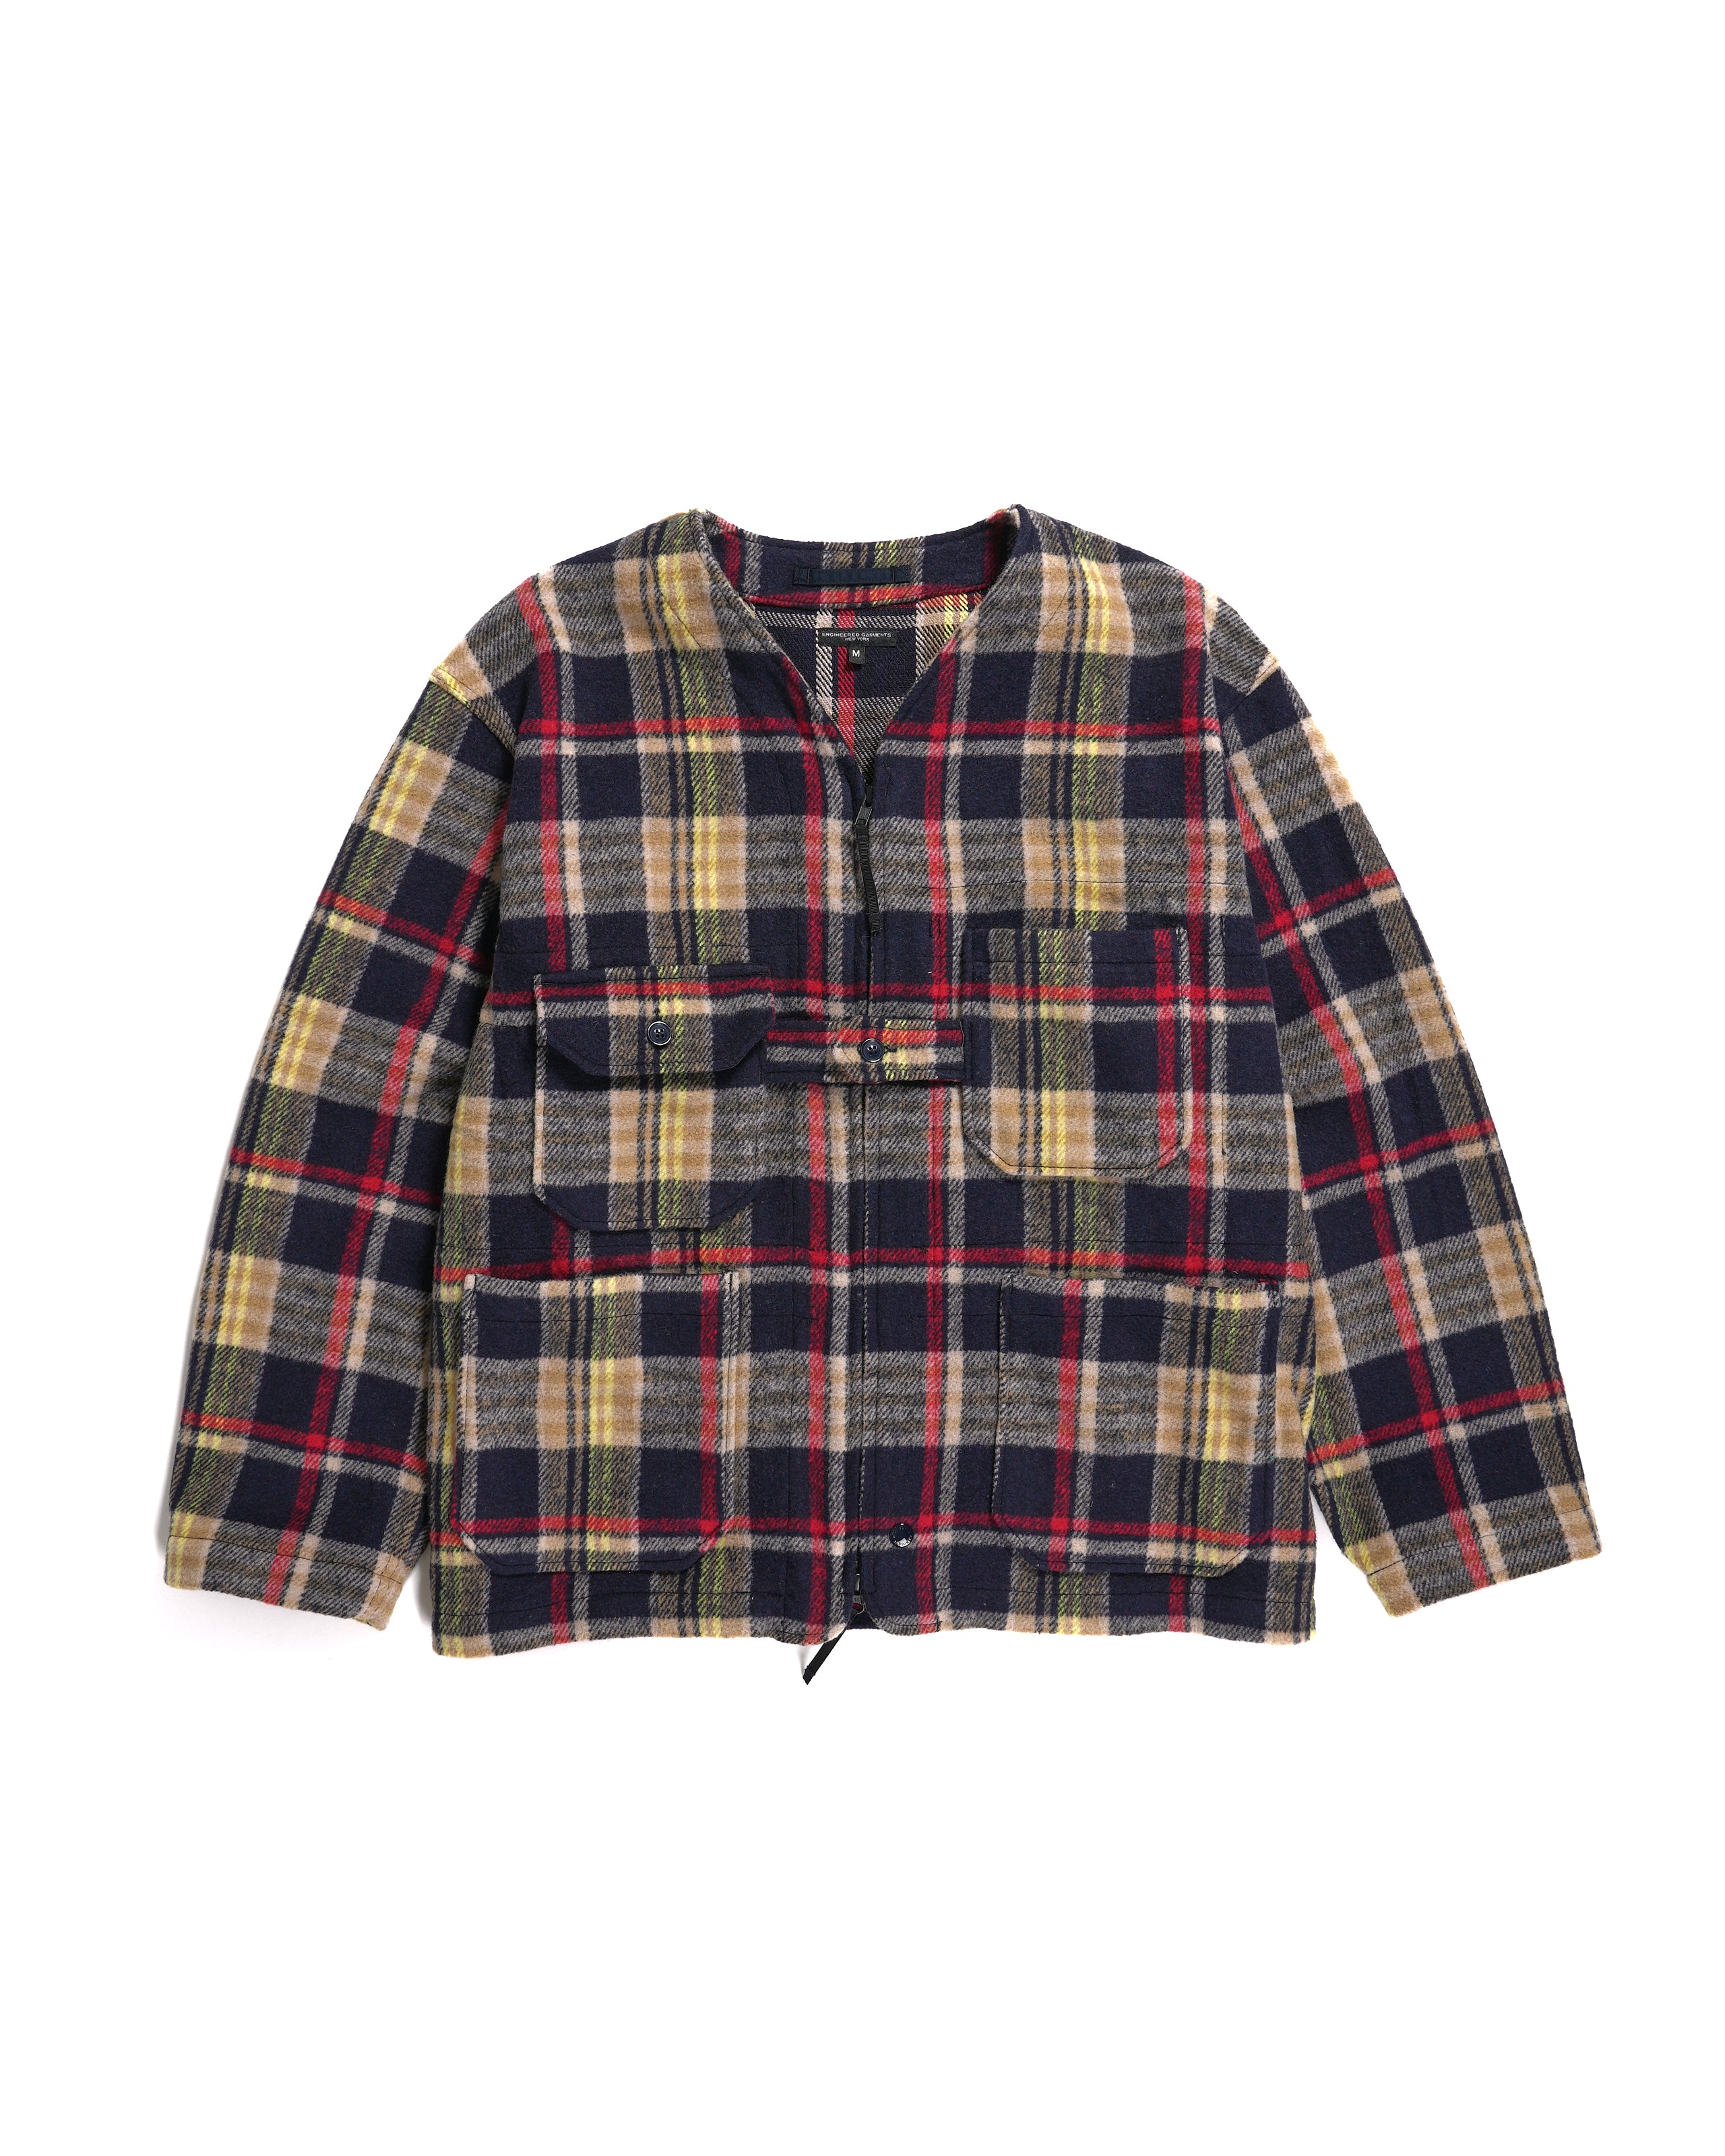 Shooting Jacket - Navy / Red Polyester Heavy Plaid